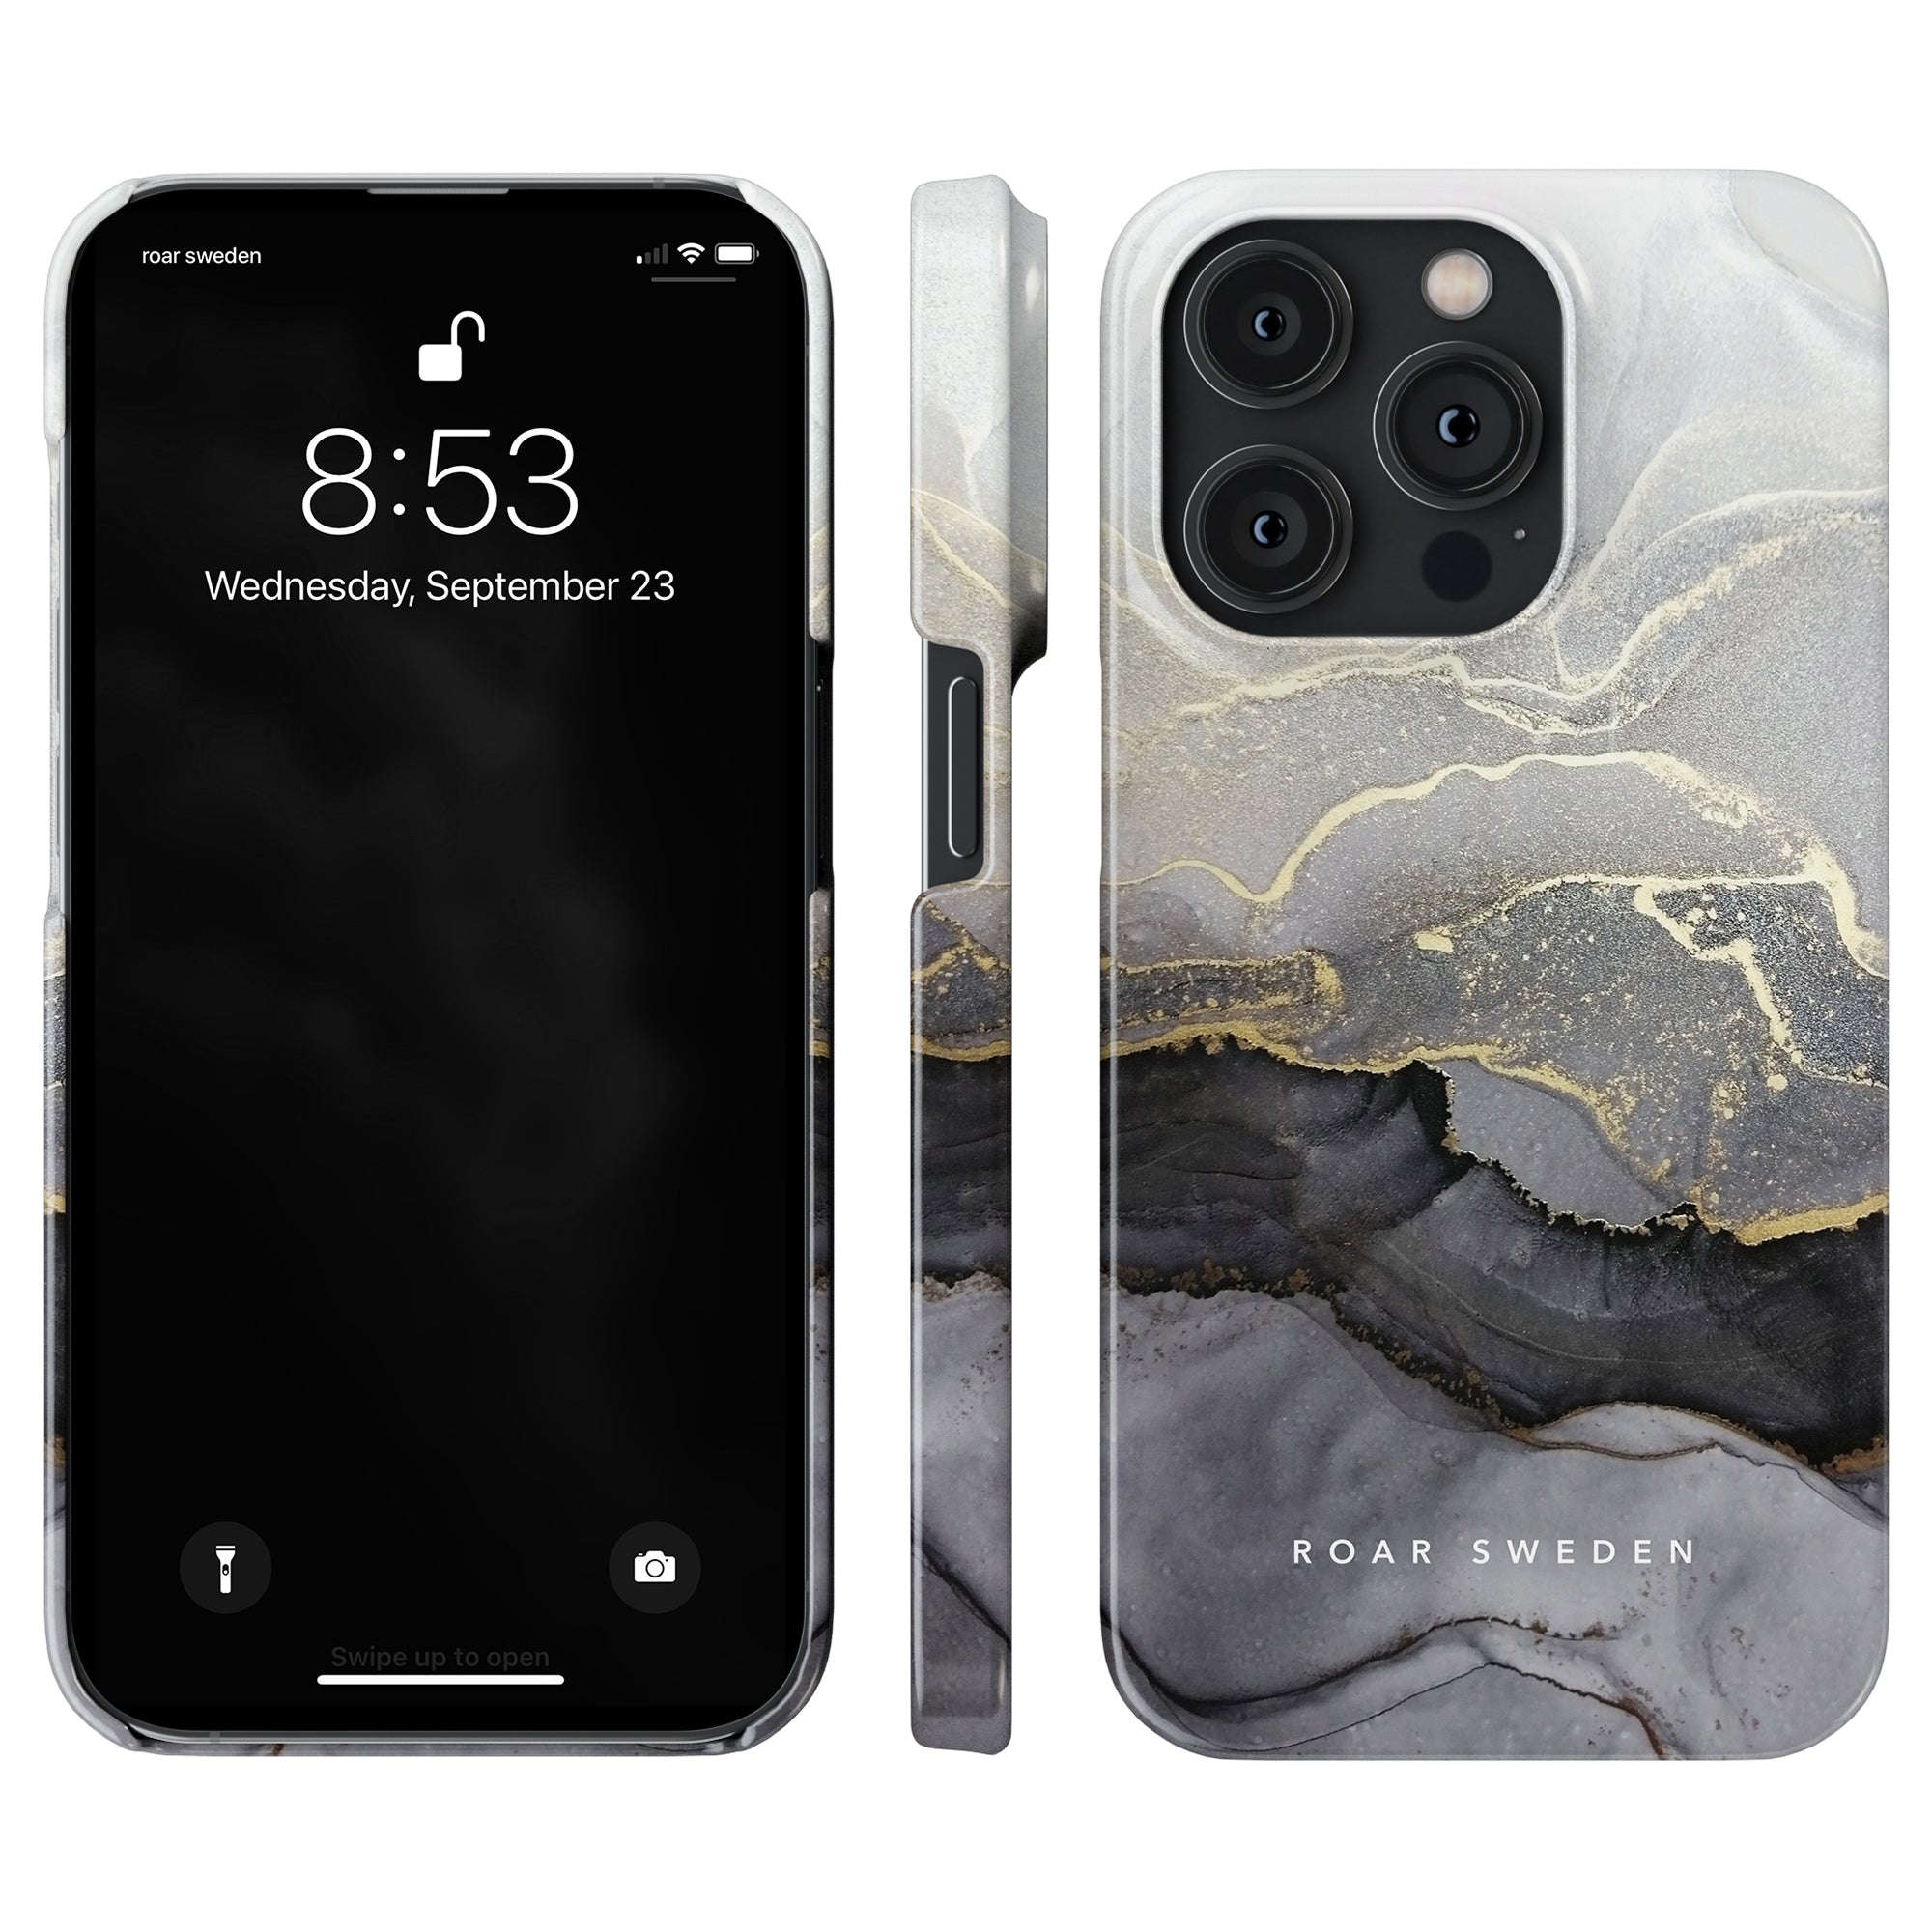 An elegant black and gold marble Sparkle - Slim case for the iPhone 11, perfect for adding a touch of sparkle to your smartphone.